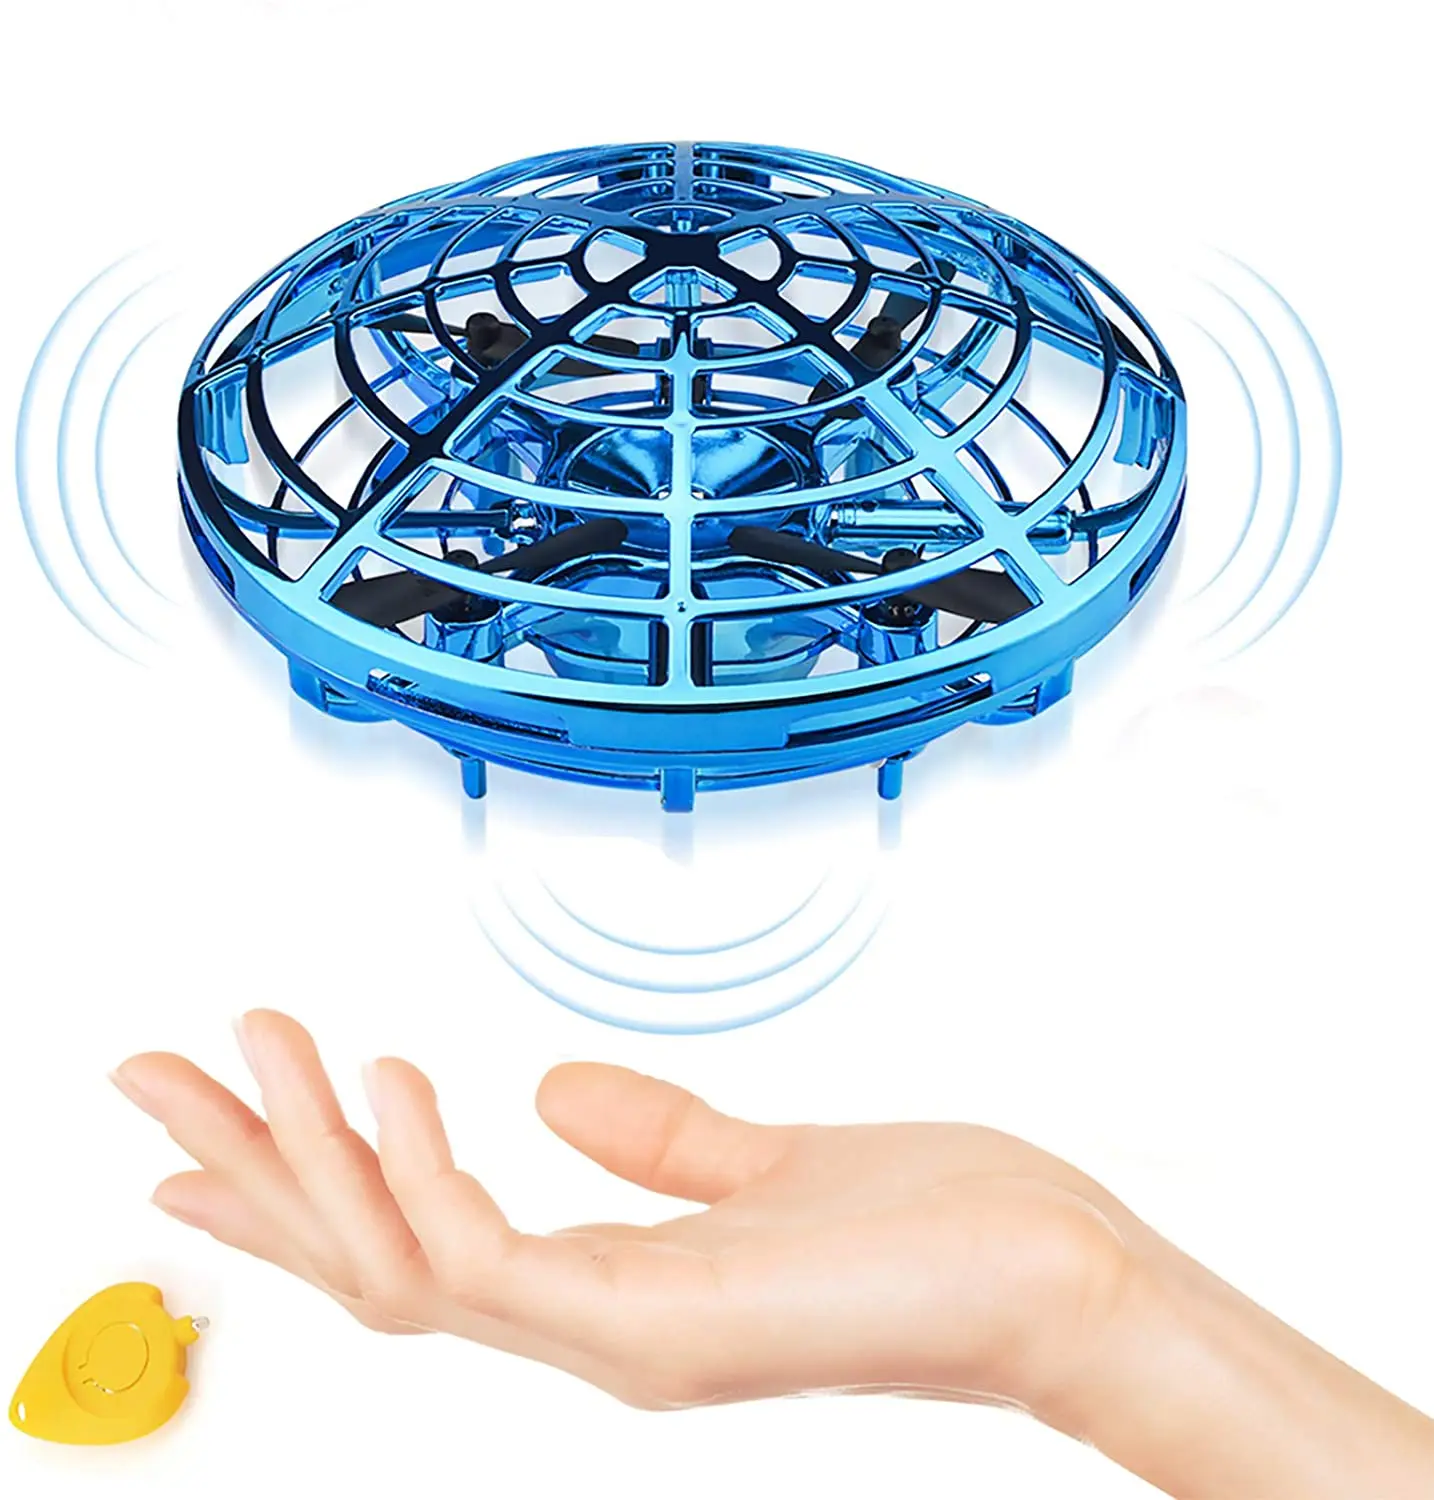 

UFO Mini Drone for Kids Flying Ball Toys Hand Controlled Rechargeable Quadcopter Infrared Induction Helicopter Outdoor Aircraft